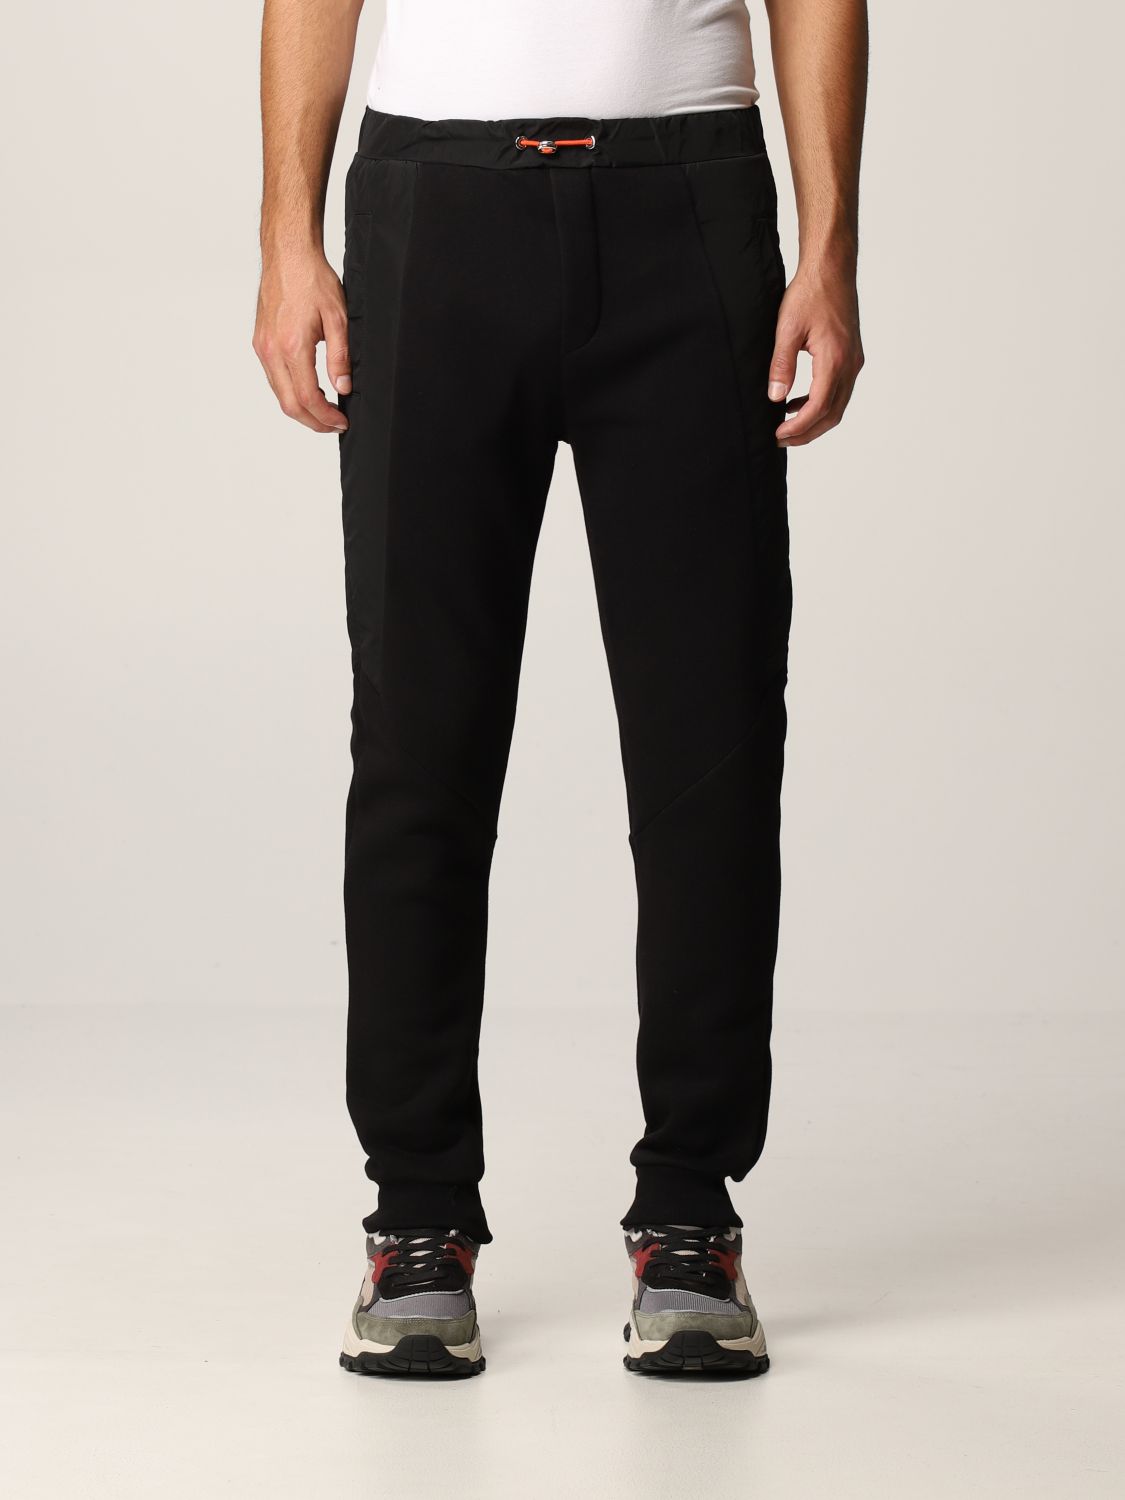 Trousers Pmds: Trousers men Pmds black 1